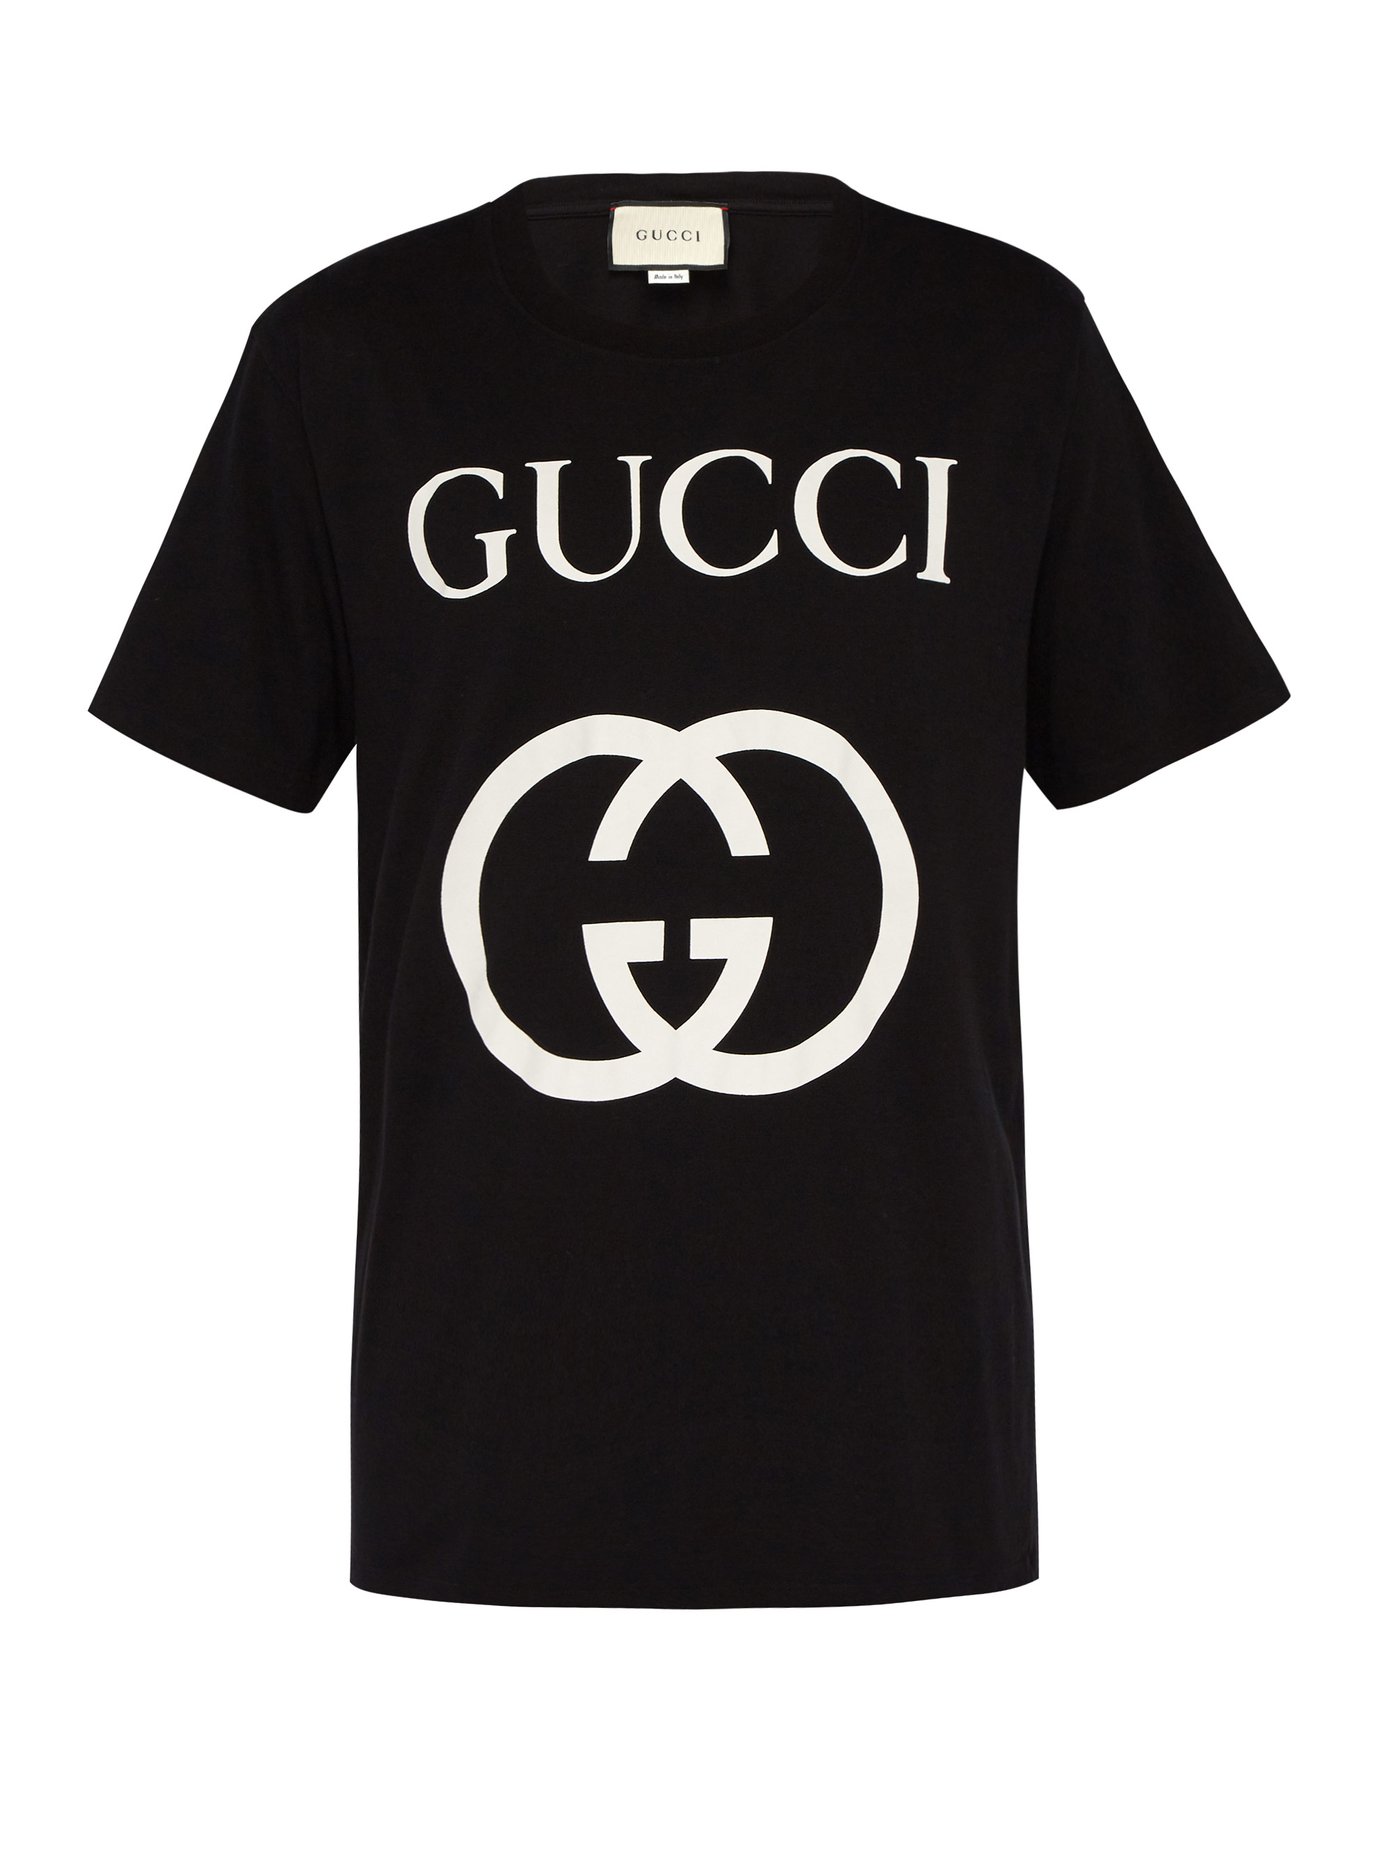 picture of gucci shirt